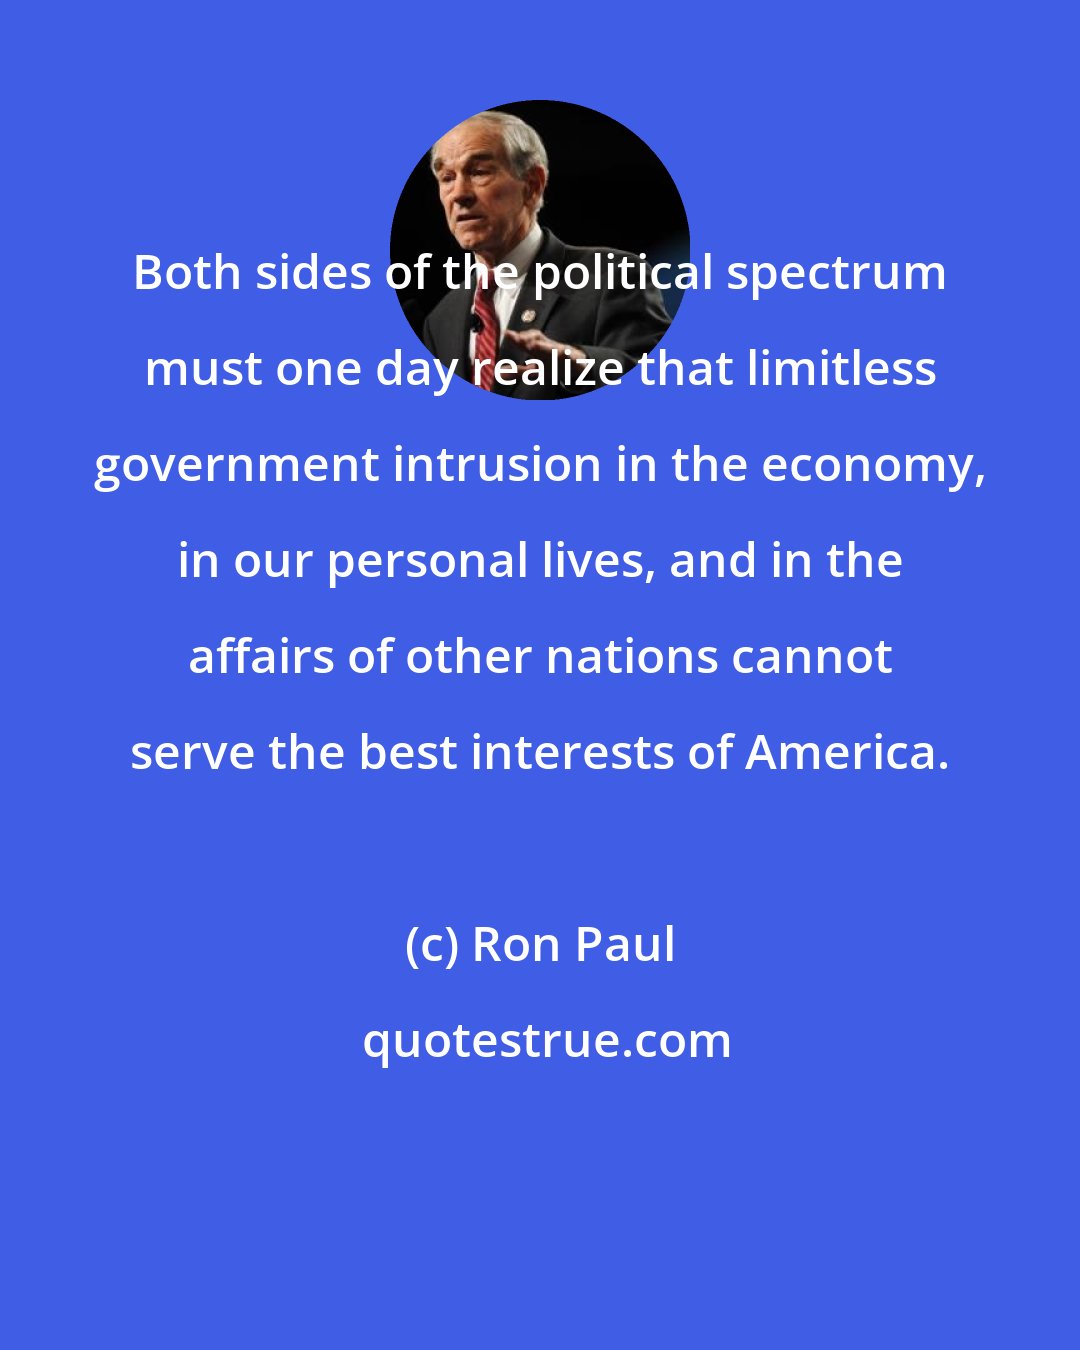 Ron Paul: Both sides of the political spectrum must one day realize that limitless government intrusion in the economy, in our personal lives, and in the affairs of other nations cannot serve the best interests of America.